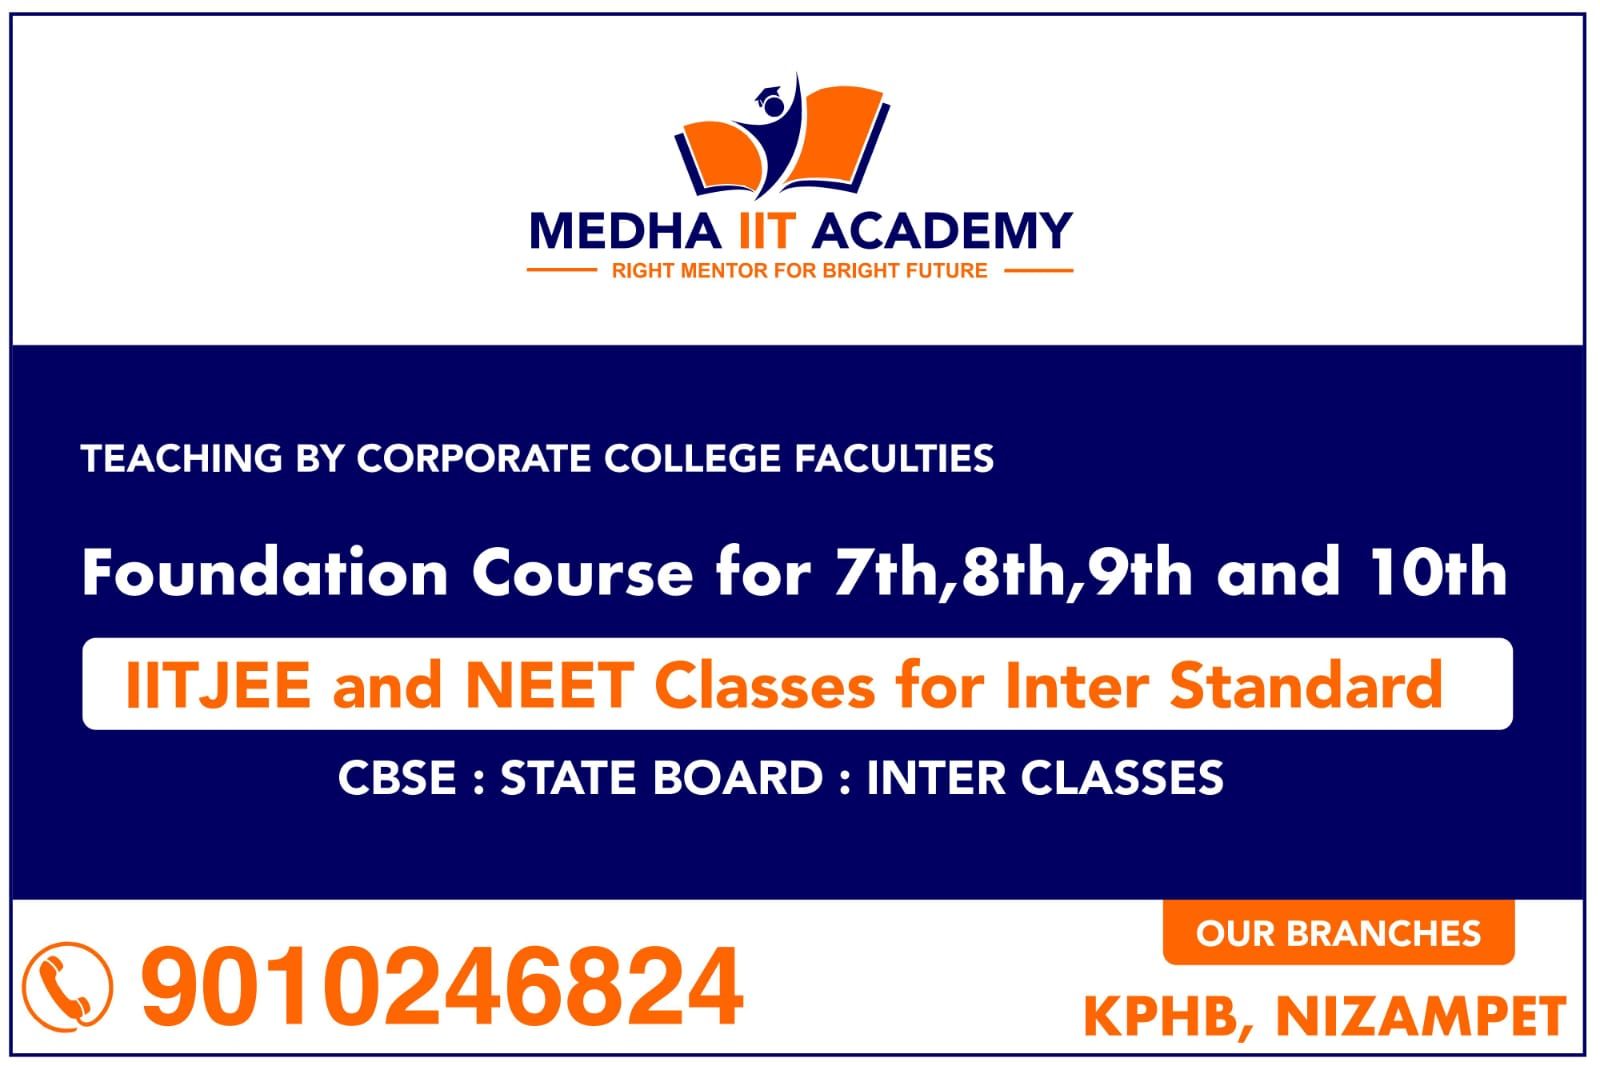 Engineering Entrance/ IIT-JEE, Entrance Coaching/ NEET, Biology, Class 11th/ 12th Tuition, Class 9th/ 10th Tuition; Exp: More than 10 year